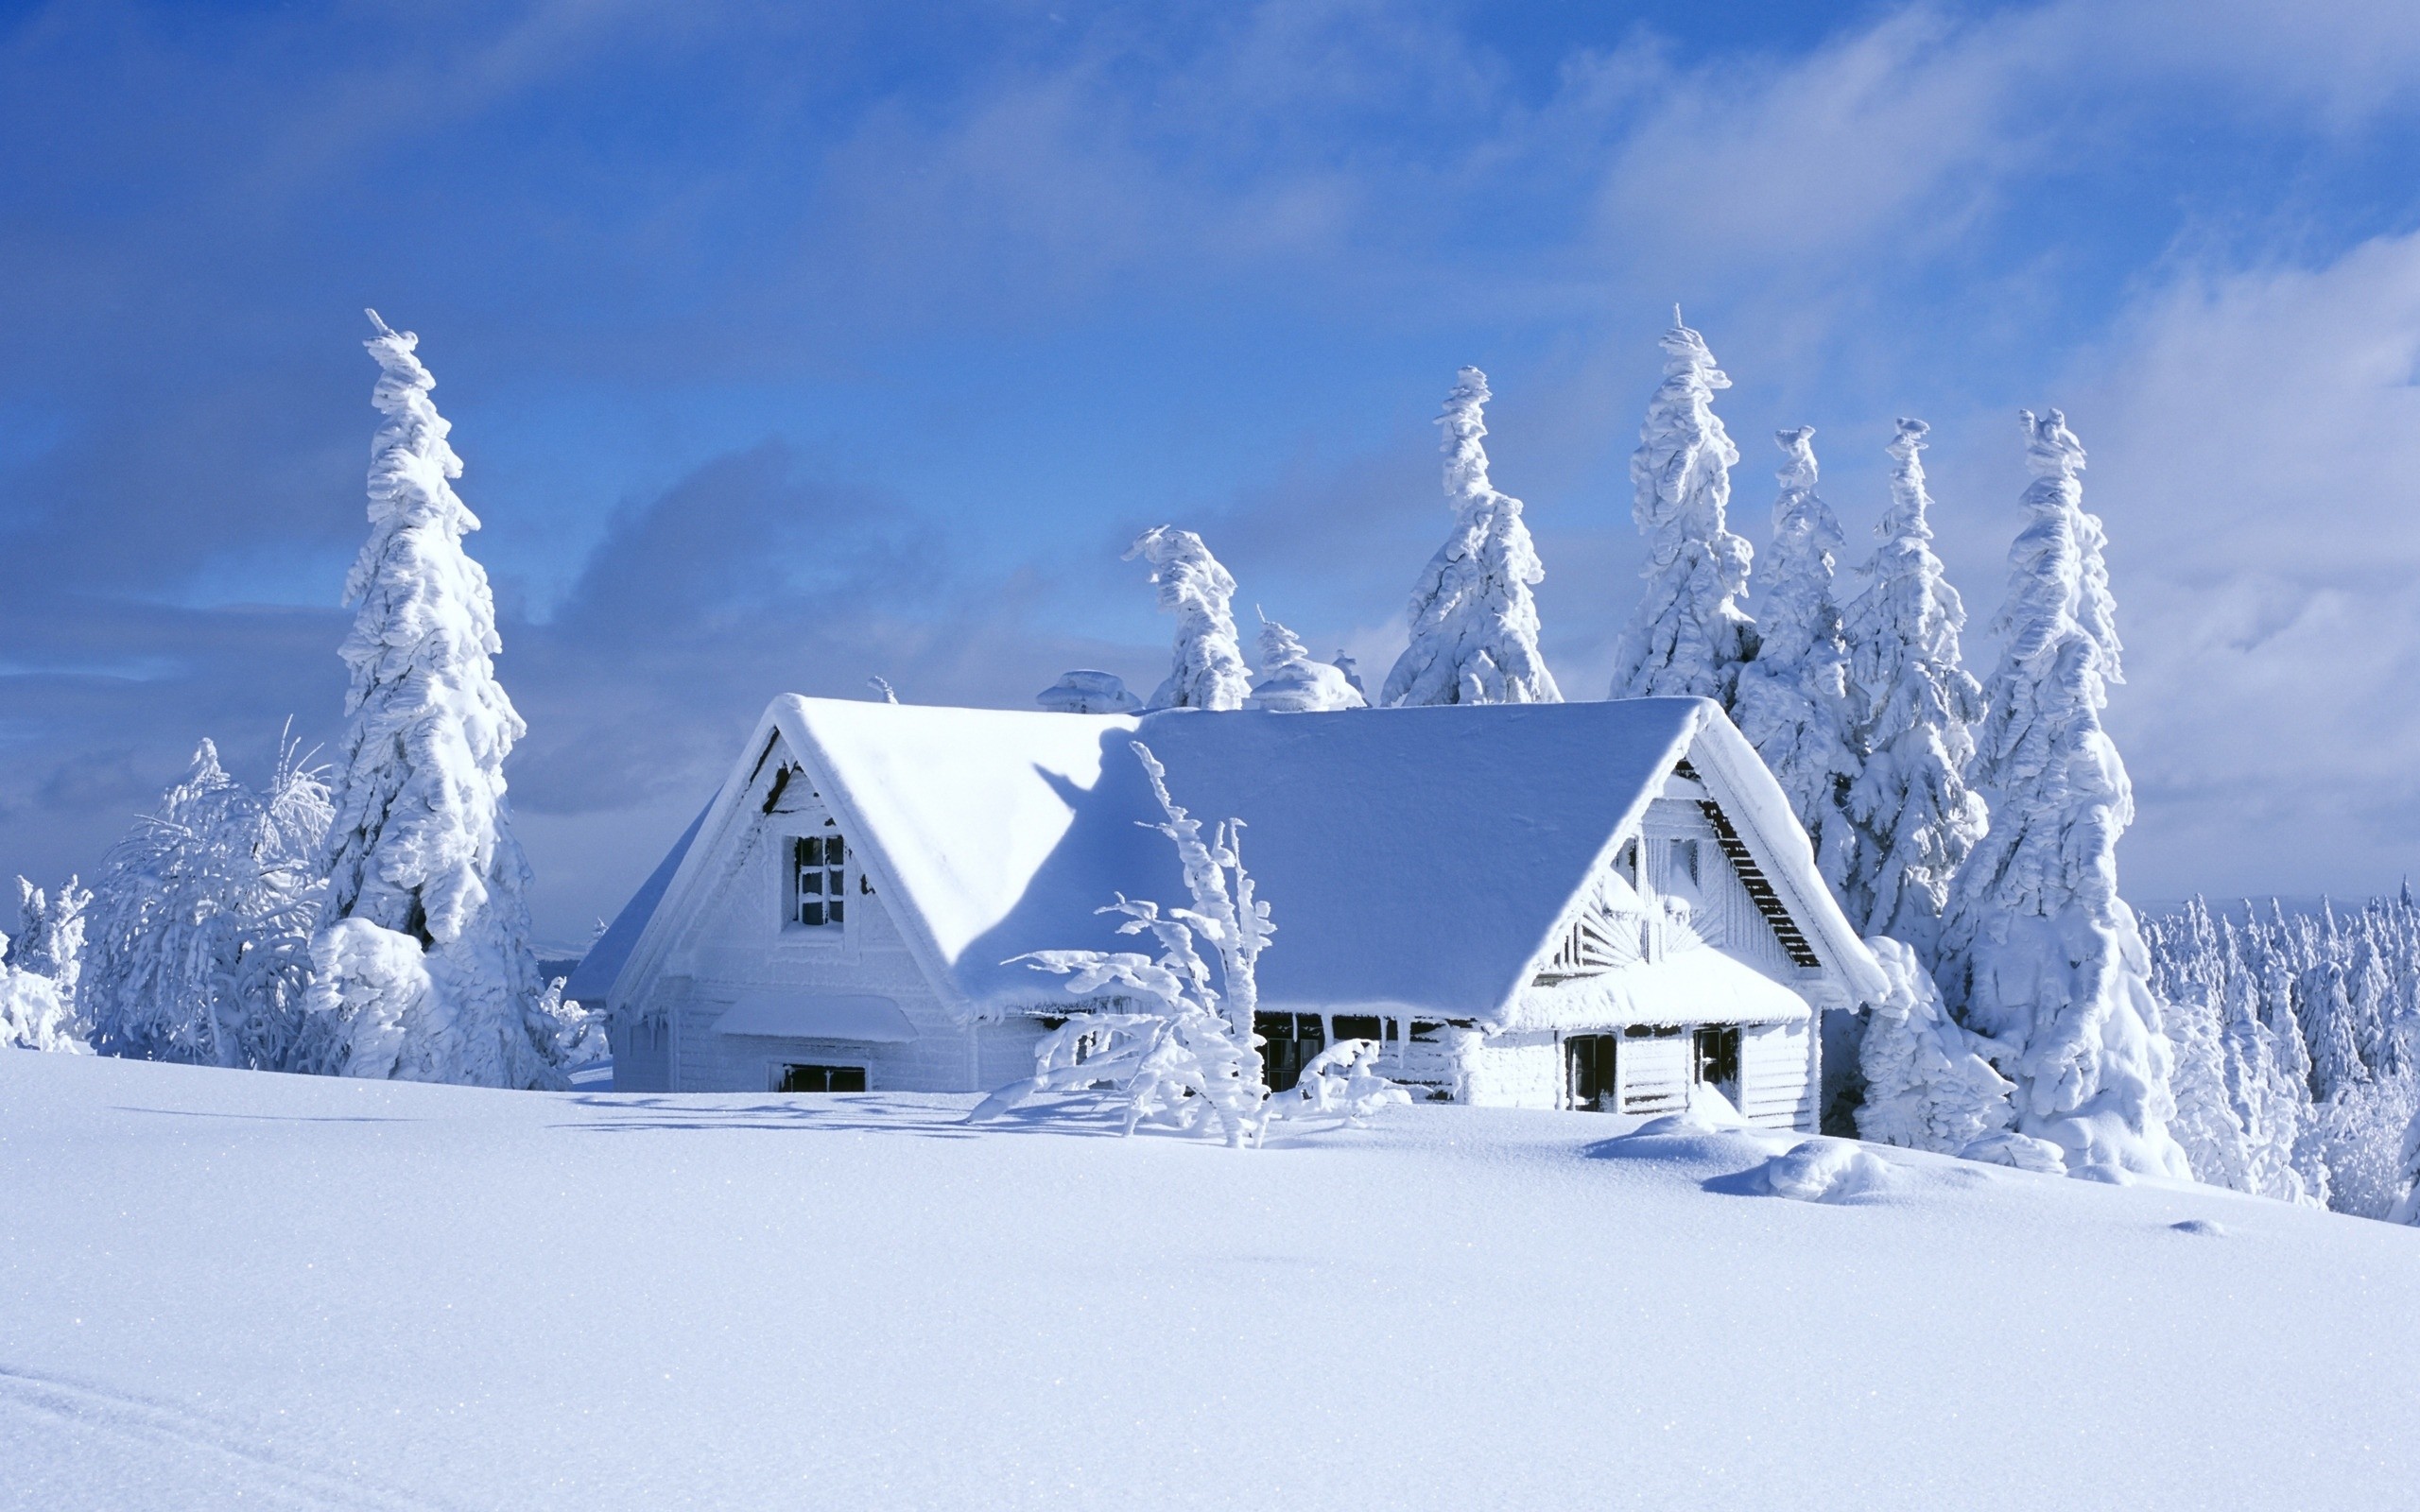 2560x1600 Snow wallpaper in high resolution for free. Get House Covered In Snow